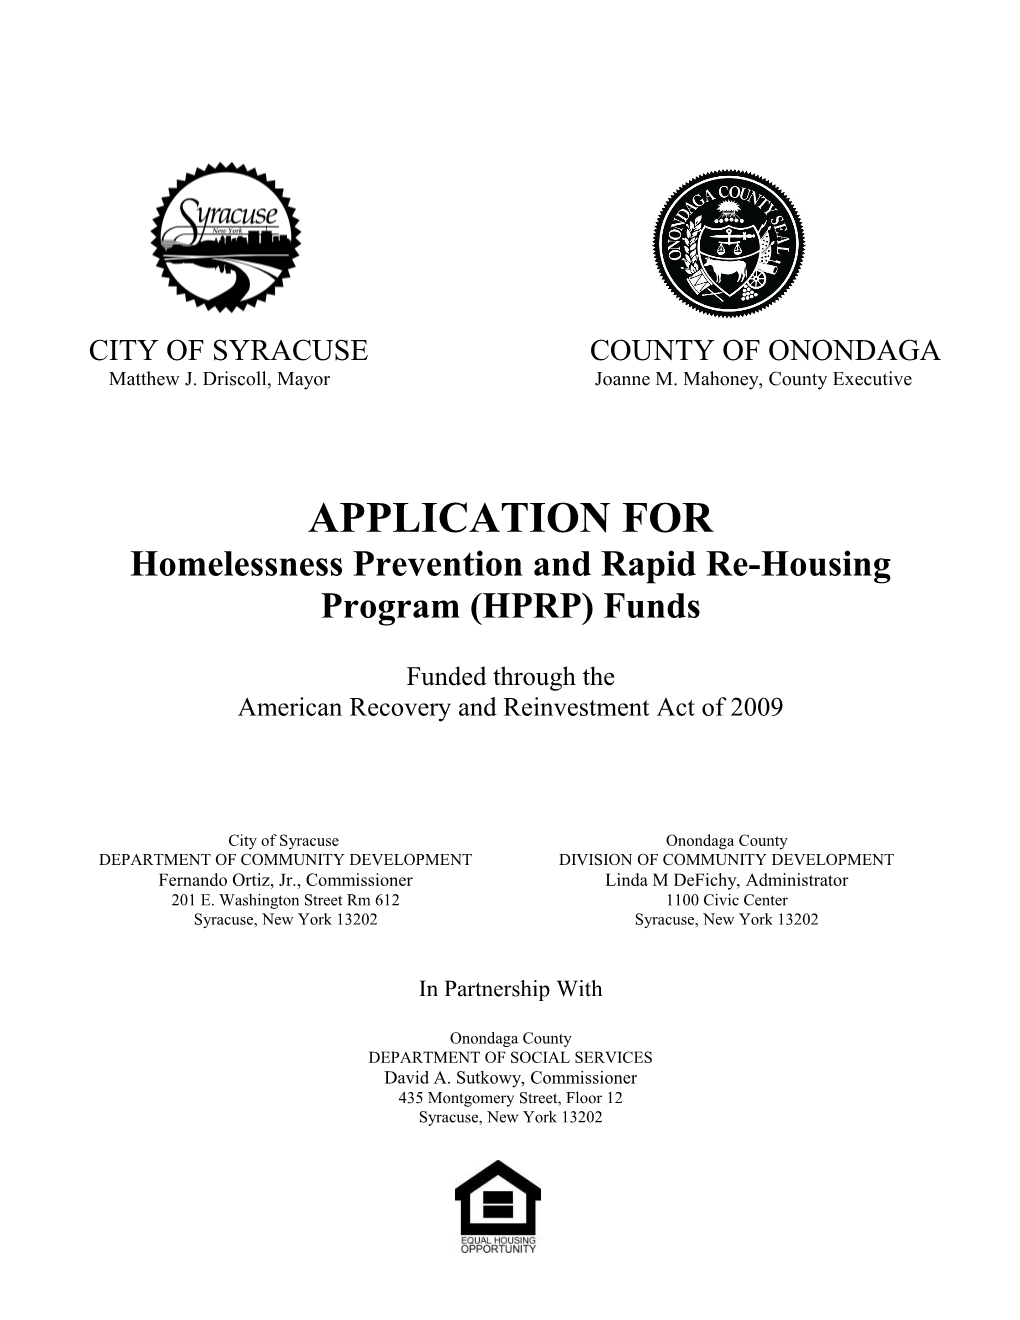 Homelessness Prevention and Rapid Re-Housing Program (HPRP) Funds